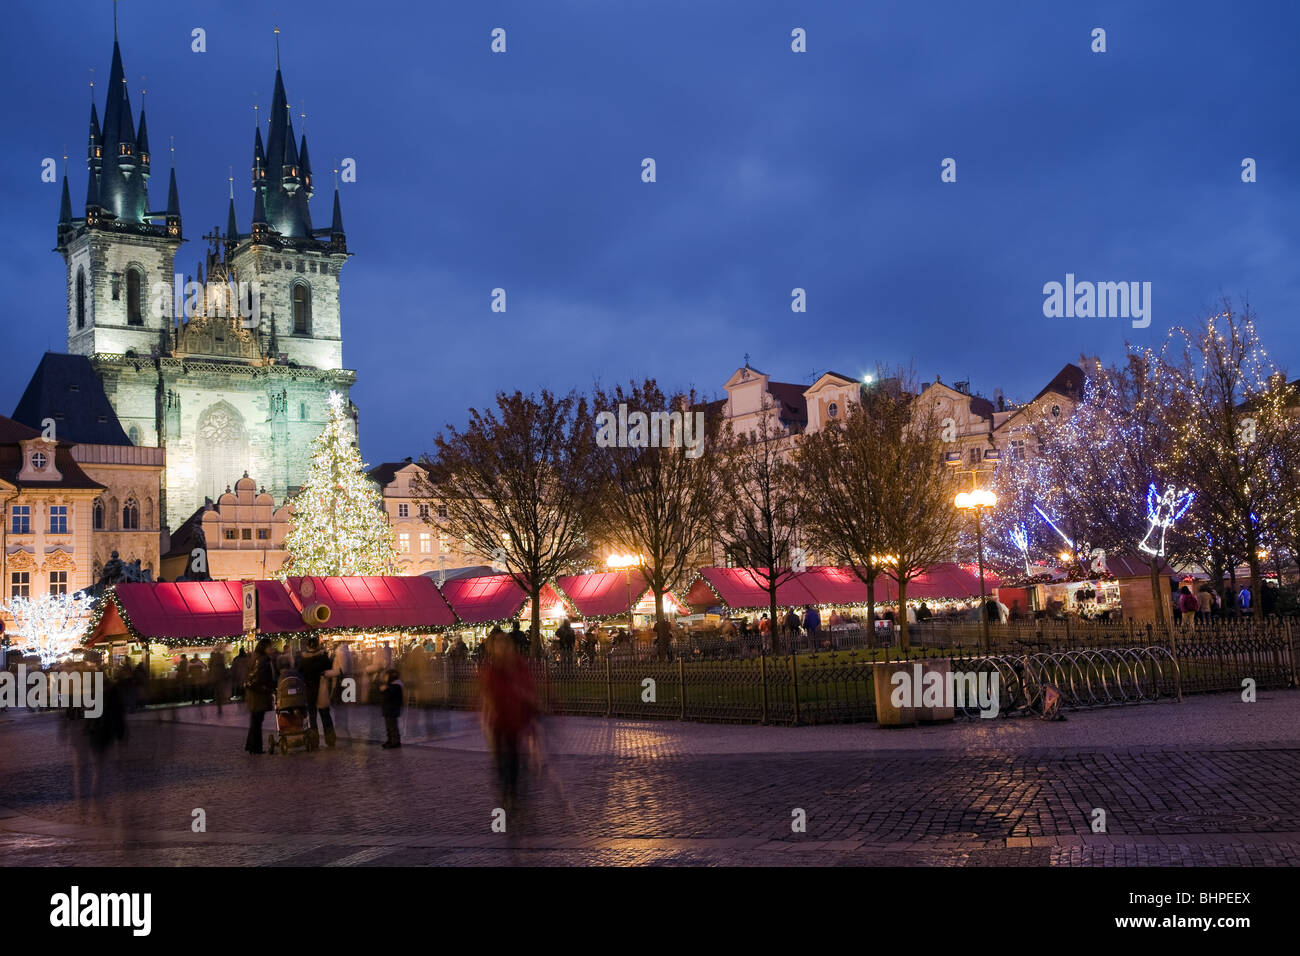 Sunset on Old Town Square with St. Teyn Gothic cathedral in Prague during Christmas market with walking people. Stock Photo